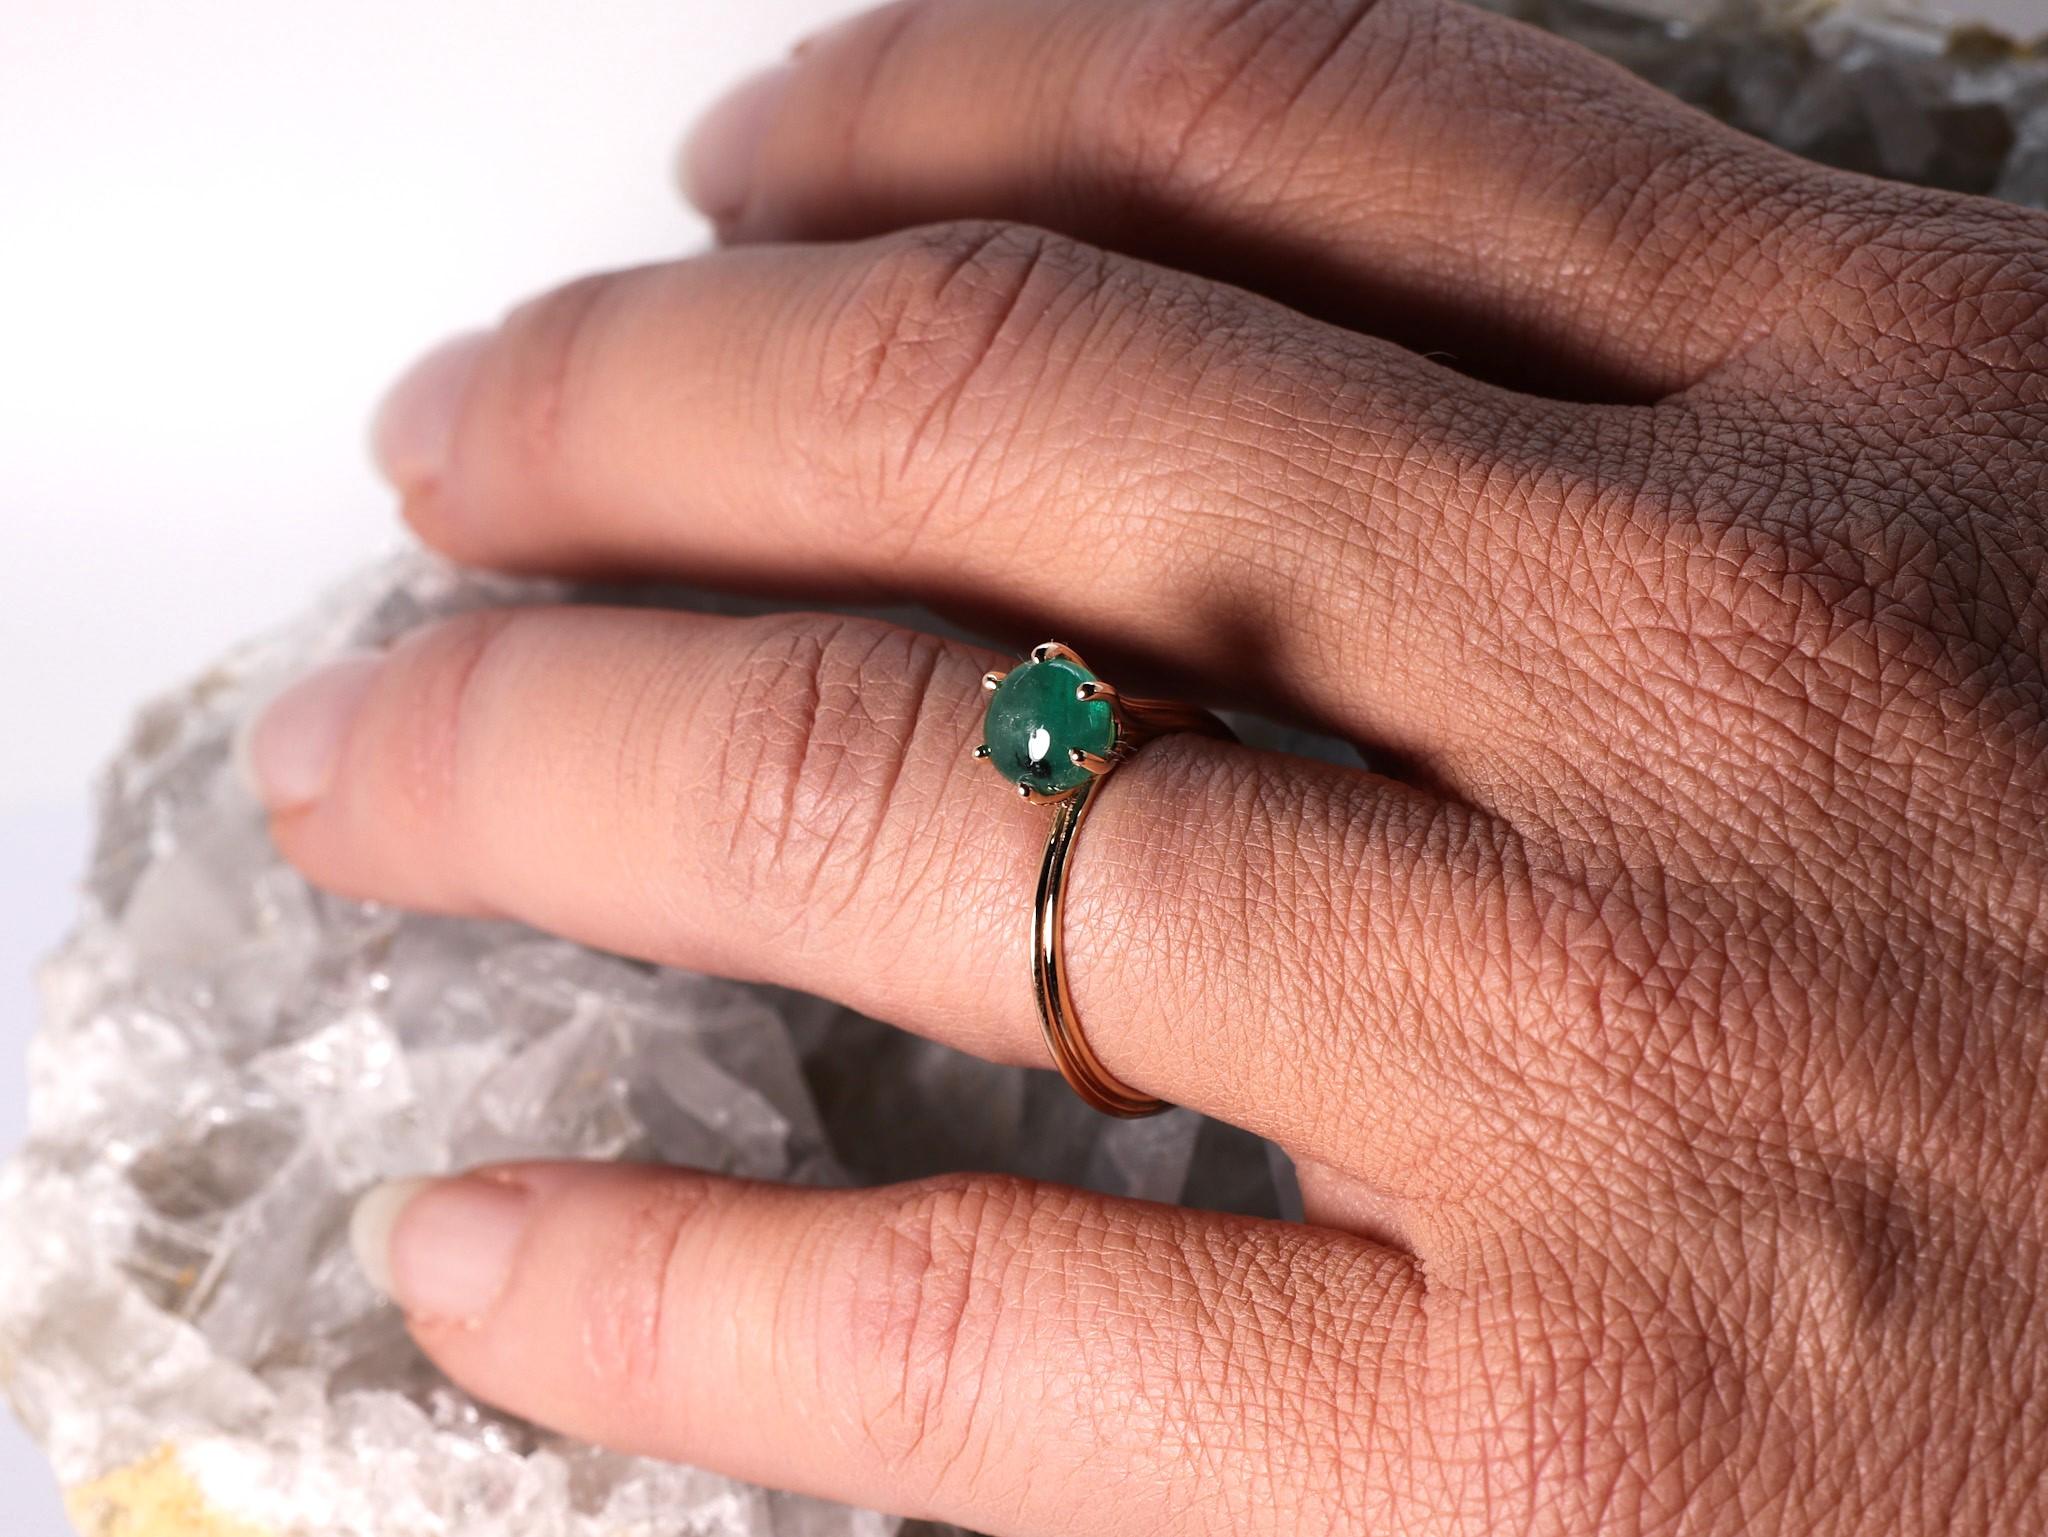 1.4 cts Emerald 18K Rose Gold  Asymmetric Cosmic Design Stackable  Cocktail Ring.
The Egle asymmetrical stackable ring is made of 18 karat rose gold and features a round cabochon cut natural Emerald around 1.40 carats, diameter 6.4 mm. The total